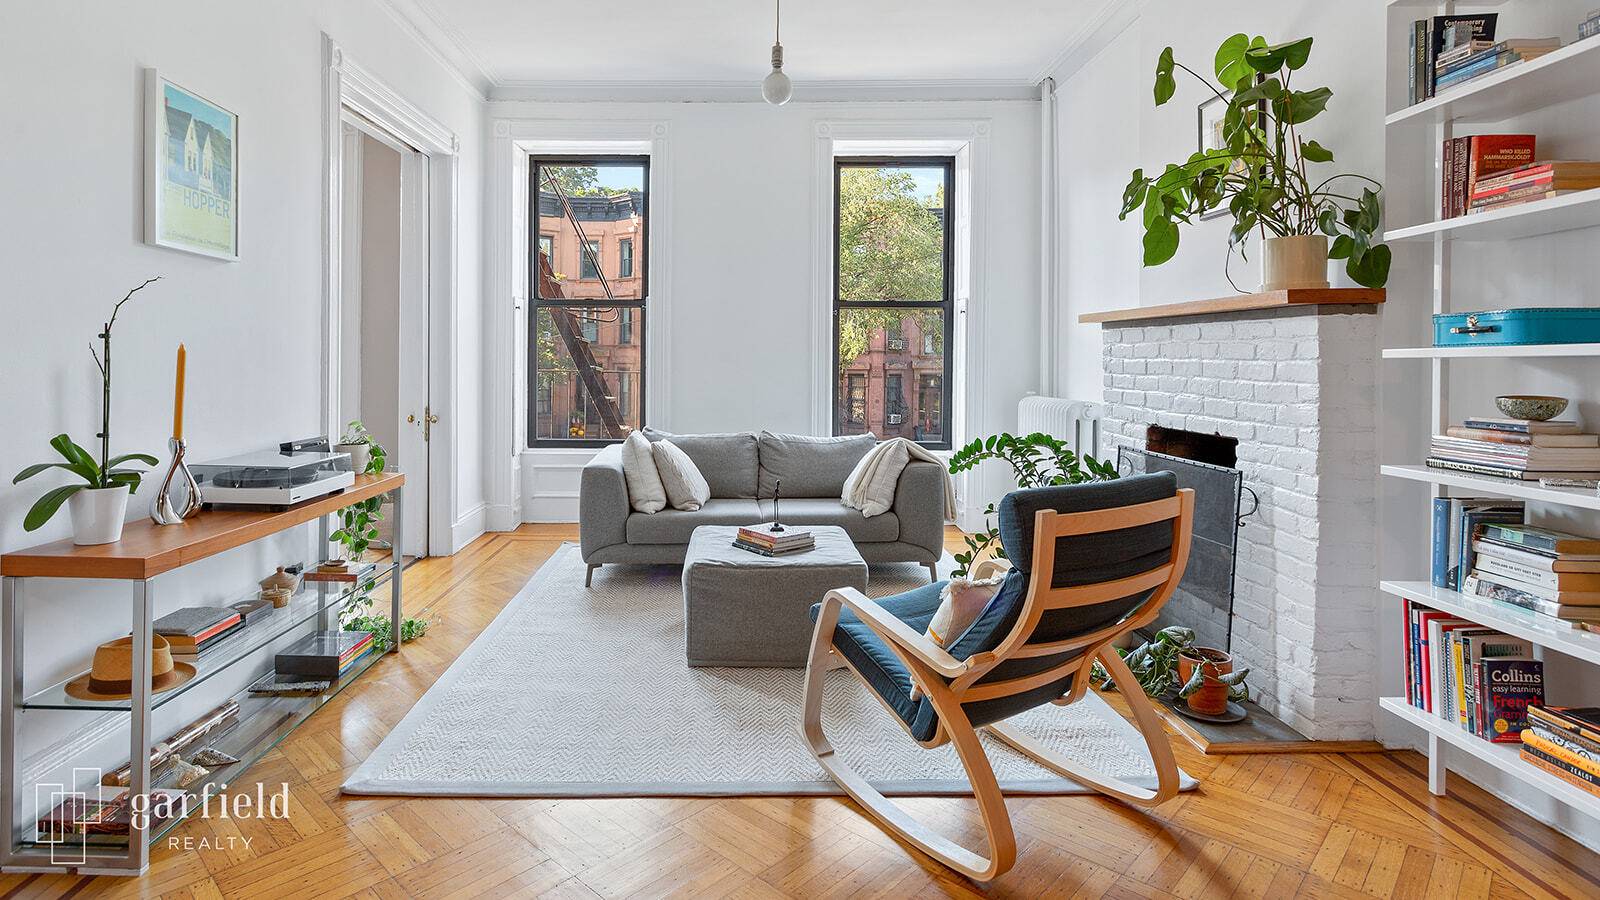 A sublime, architect designed renovation elevates this classic one bedroom co op to the must have category.